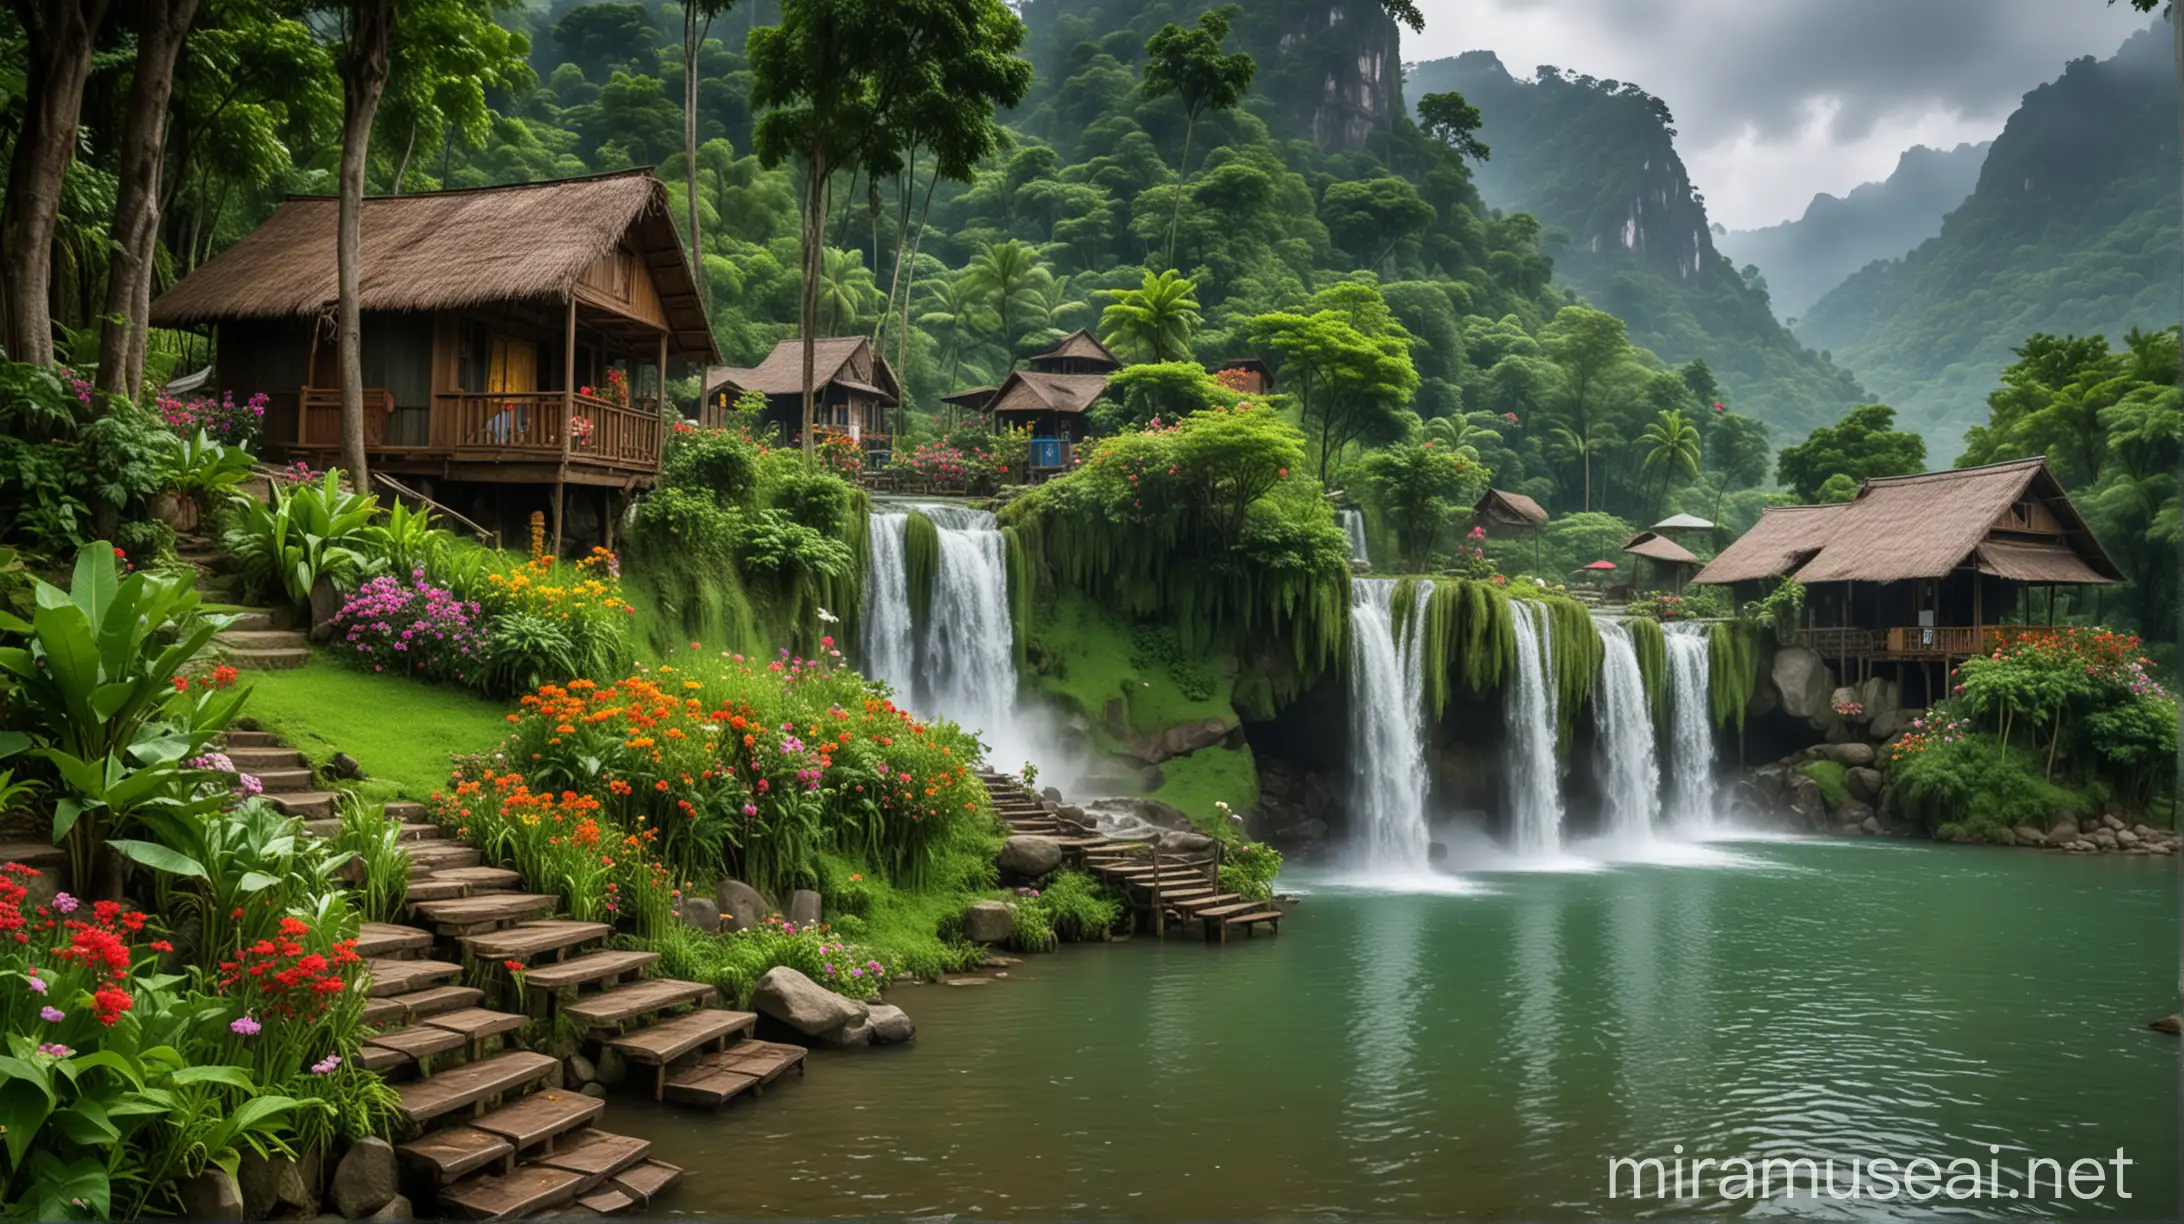 moonsoon forest village house at mountain with flowers and waterfall and sitting chairs a waterfall with a hut and a lake, in the style of 32k uhd, moonsoon emerald and green, colorful dreams, romantic riverscapes, beautiful scenery waterfall view and village in forest